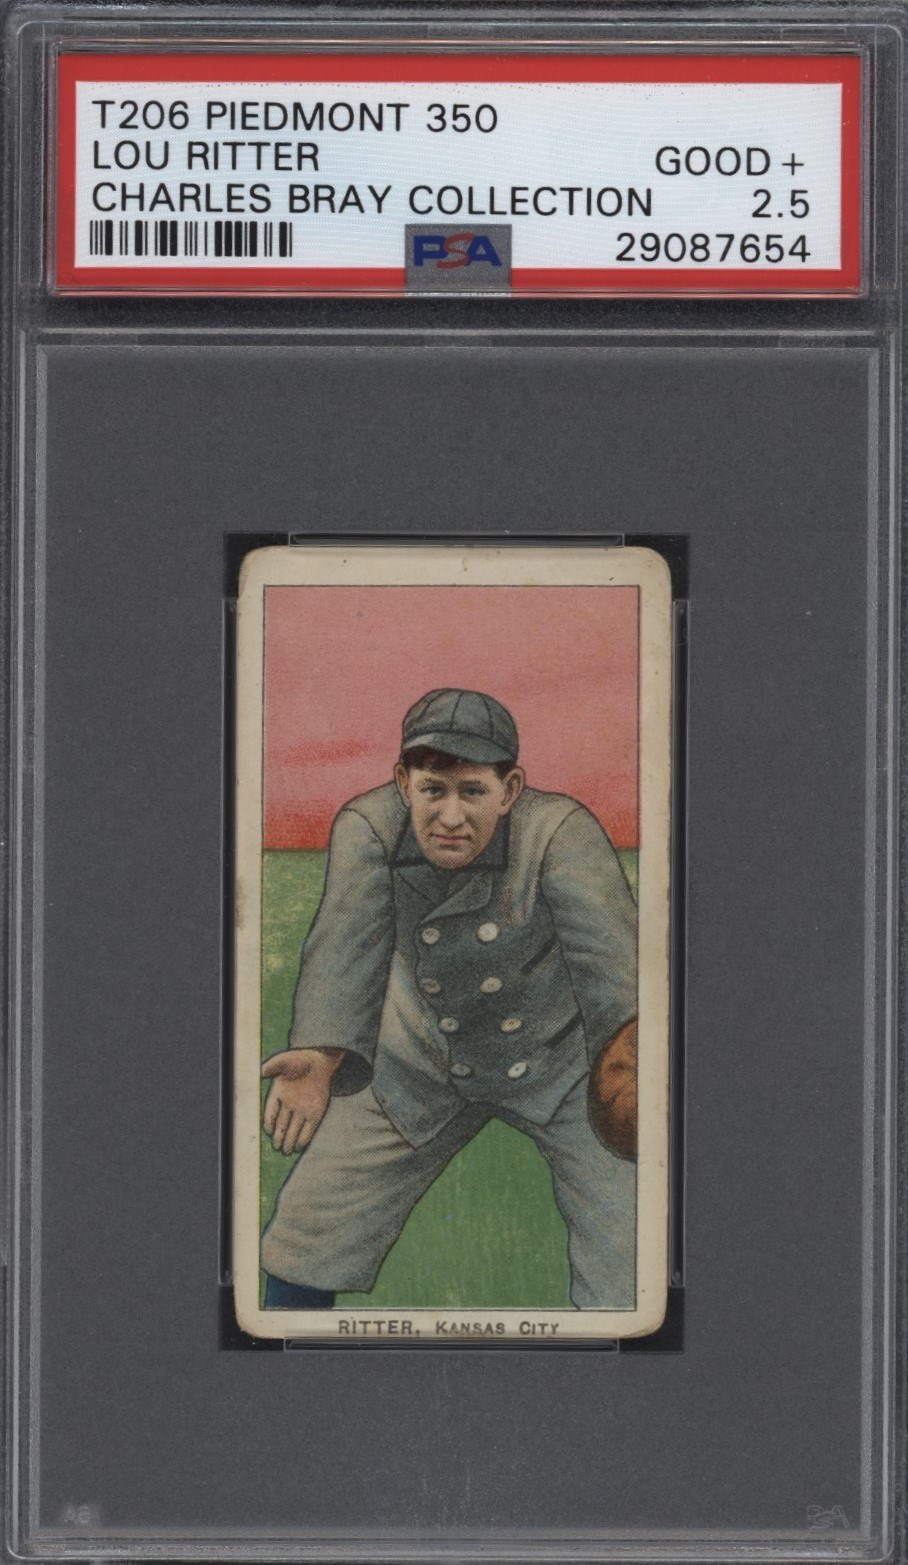 Baseball and Trading Cards - T206 Piedmont 350 Lou Ritter PSA 2.5 From the Charles Bray Collection